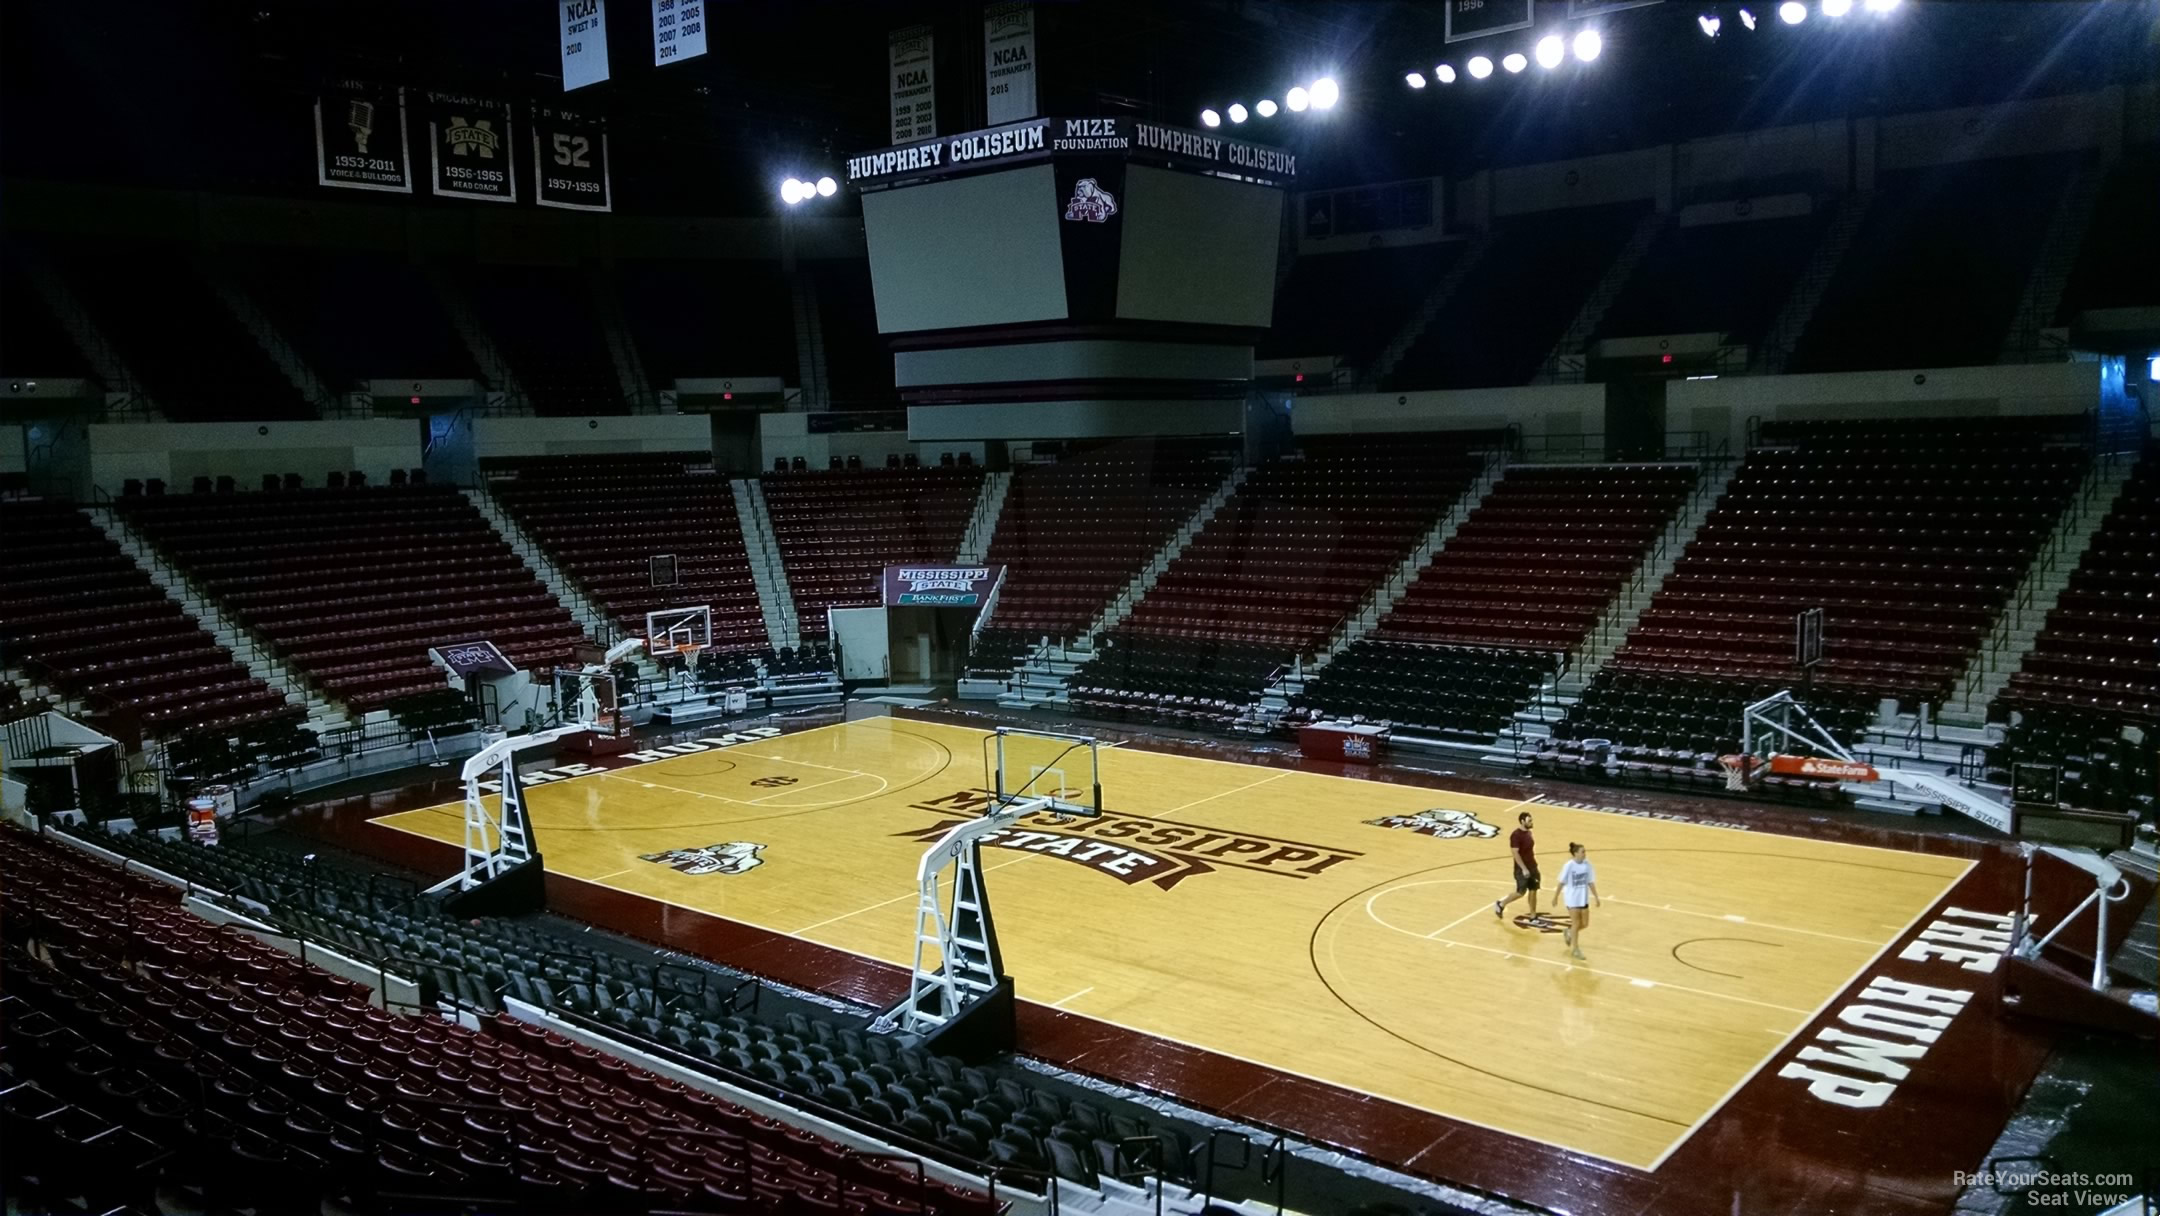 section 104, row 15 seat view  - humphrey coliseum